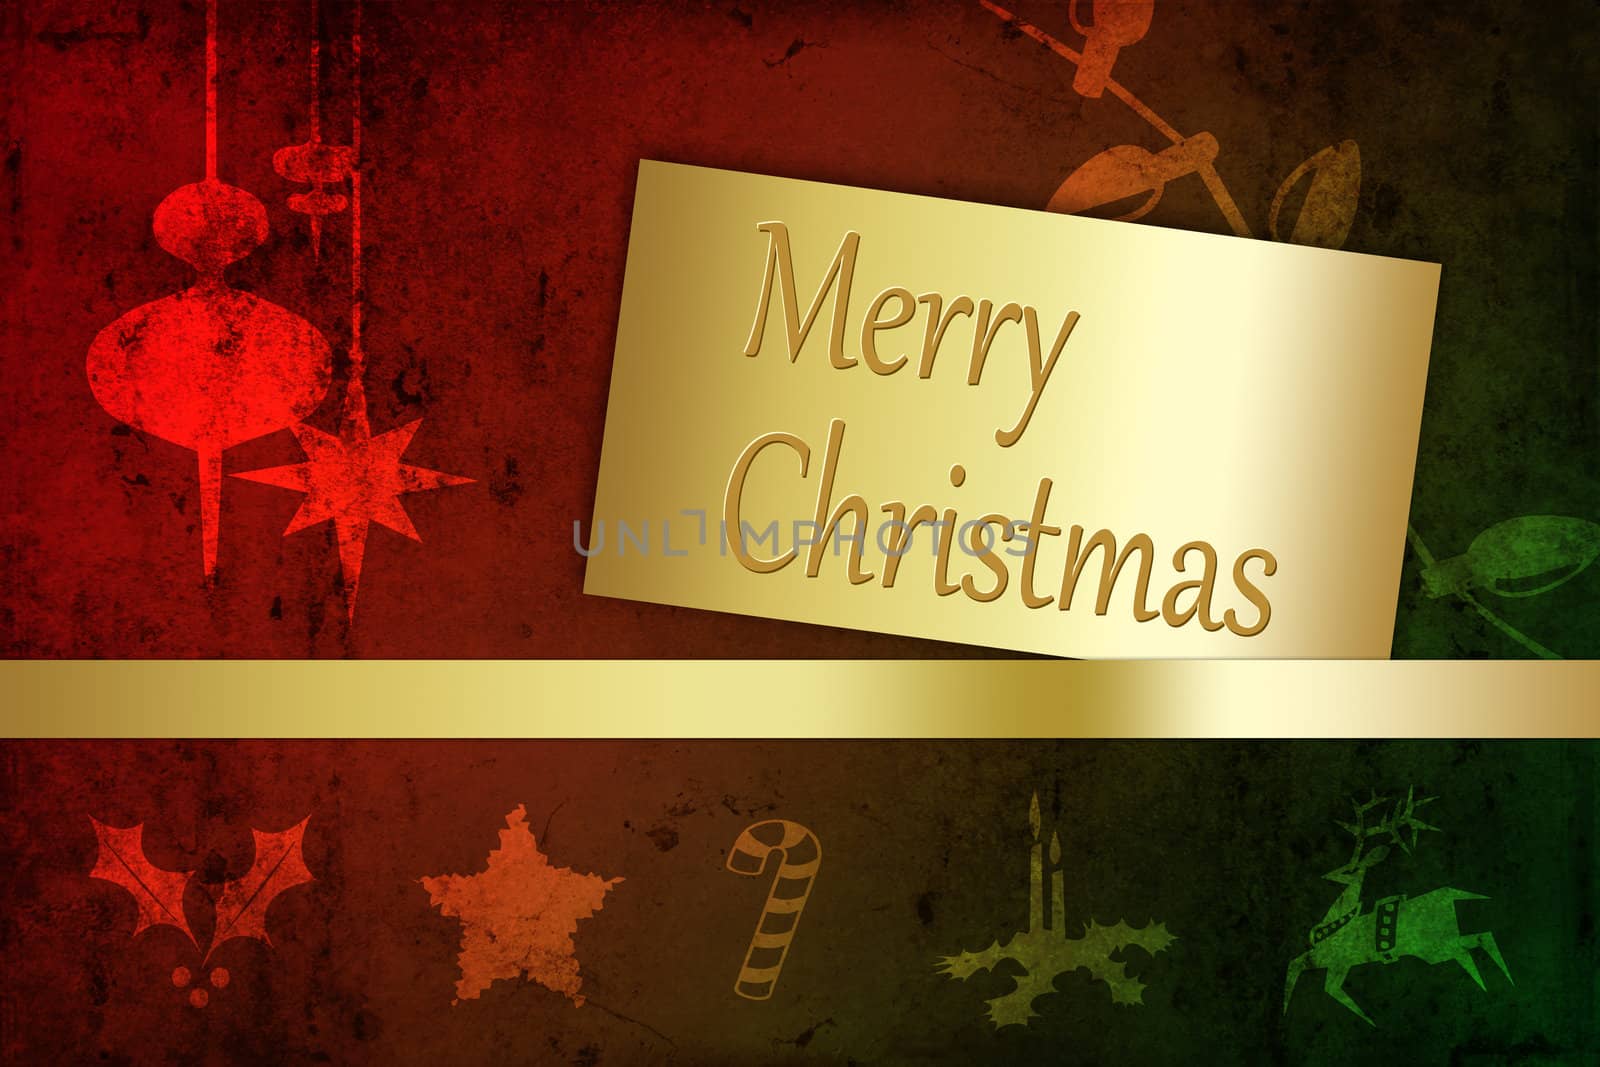 A modern and abstract Christmas Illustration: A golden paper with border on a grungy red-green background with Christmas elements.